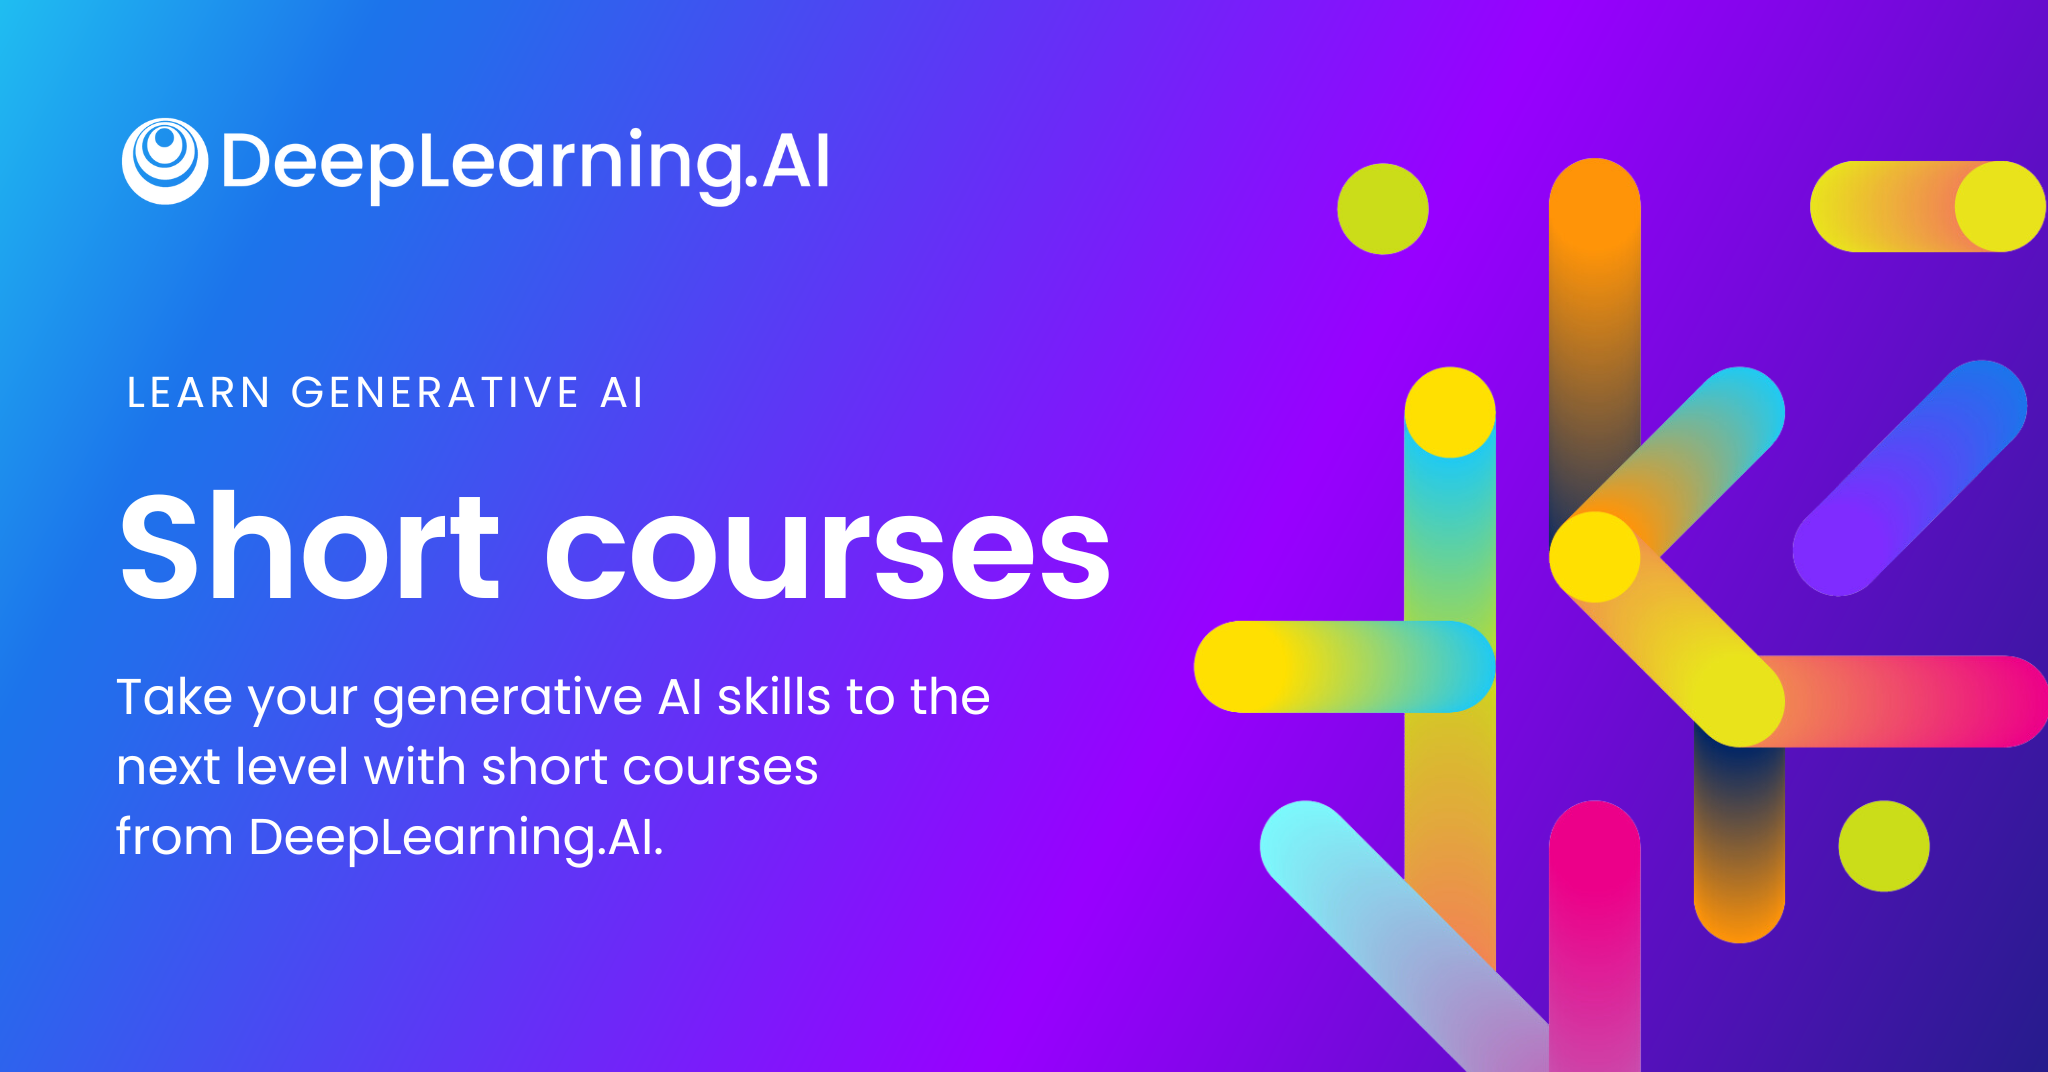 Launching a free course on how to use Open Source AI to build